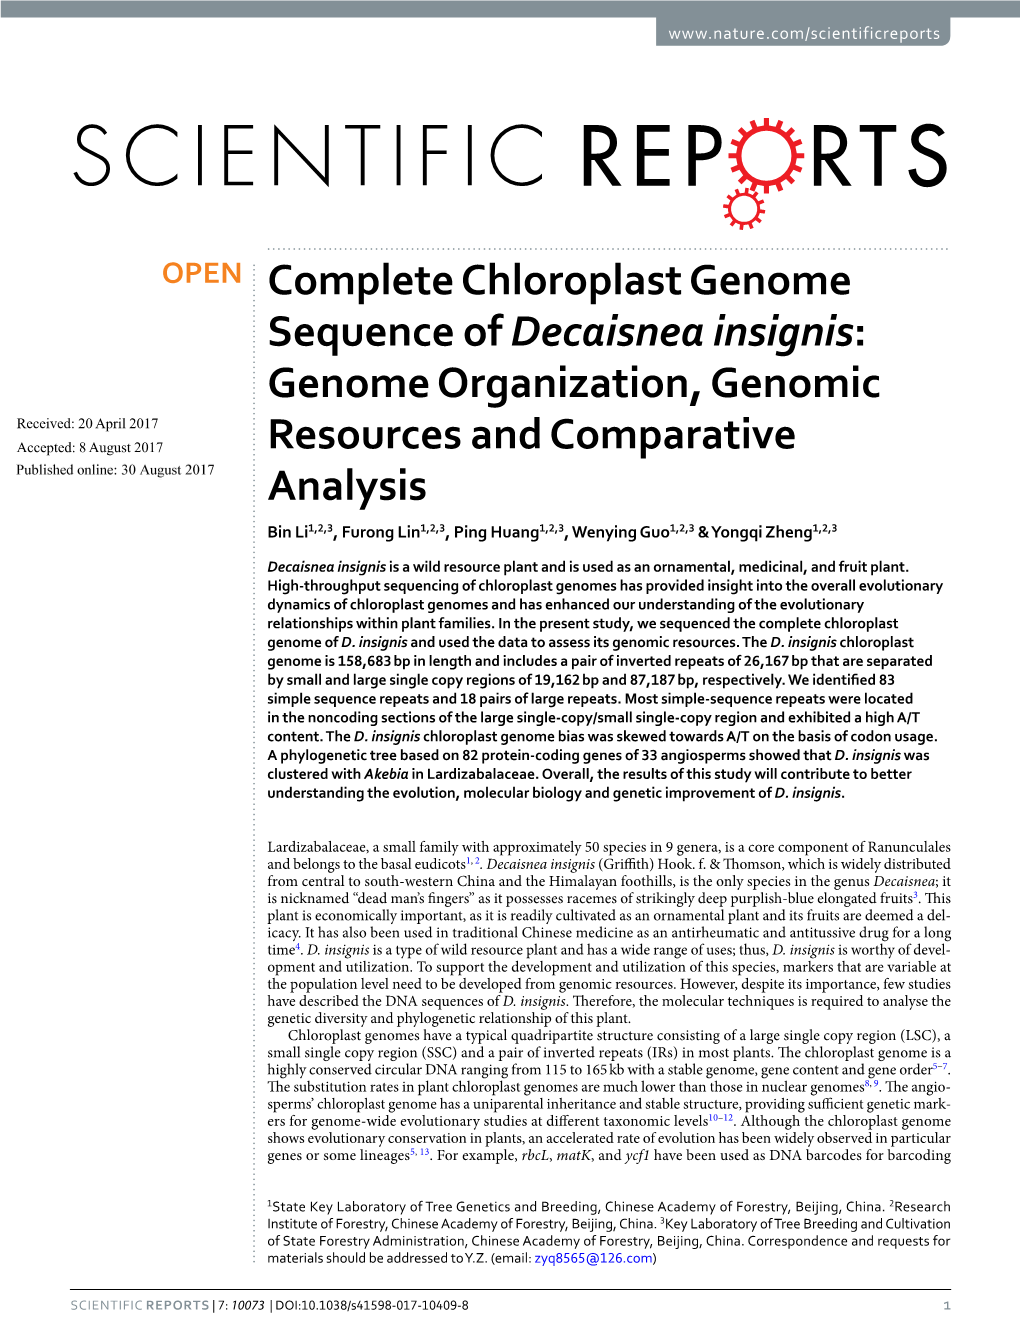 Complete Chloroplast Genome Sequence of Decaisnea Insignis